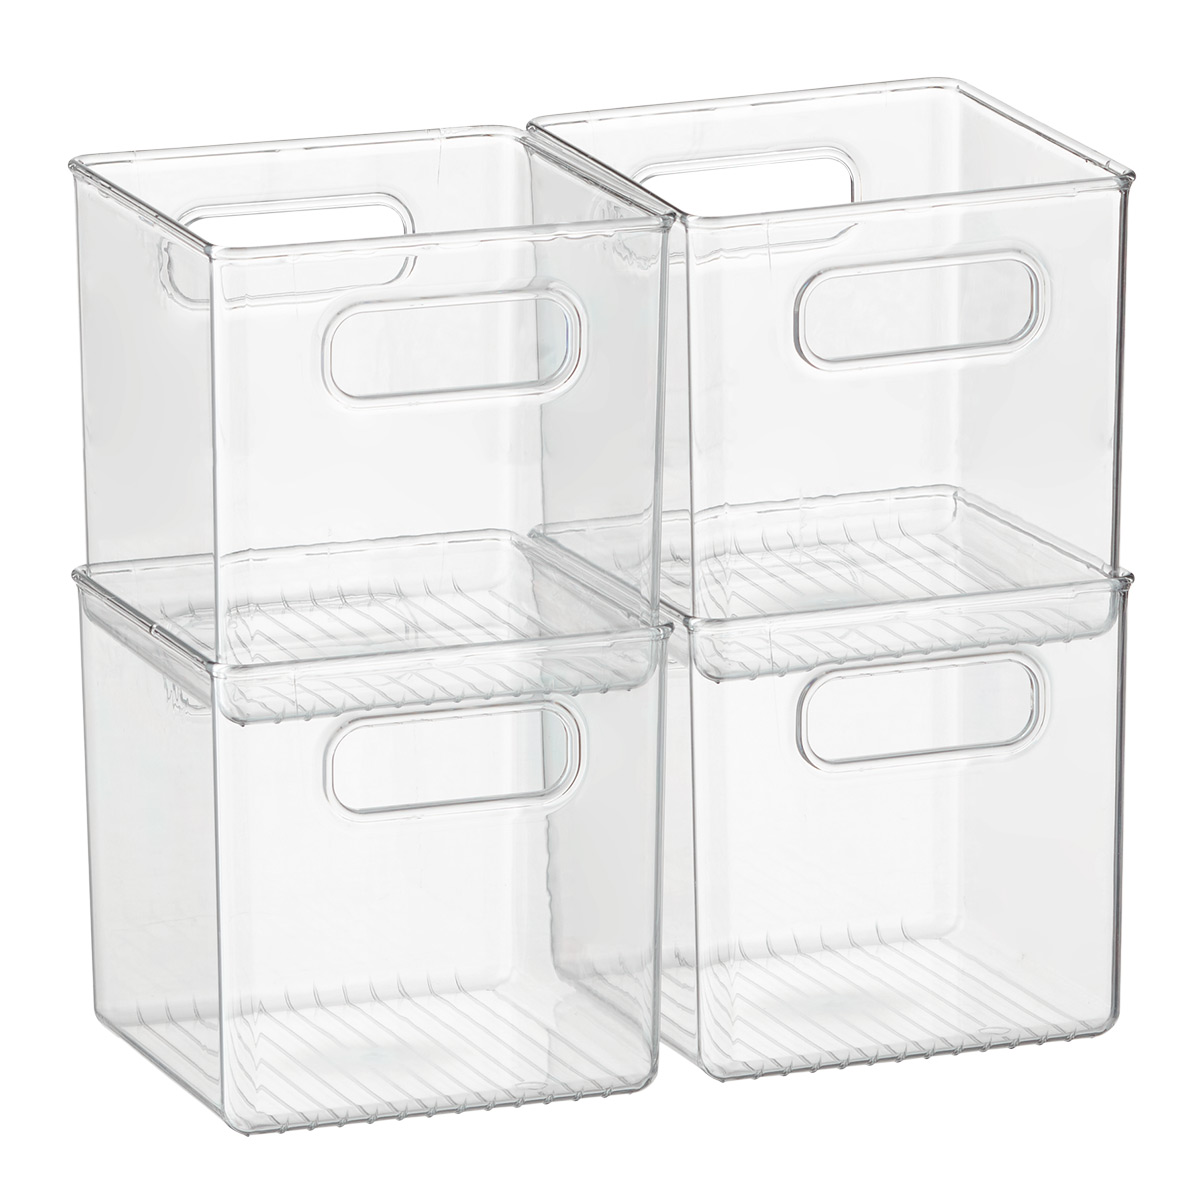 https://www.containerstore.com/catalogimages/490008/10090431-small-pantry-cube-4ct.jpg